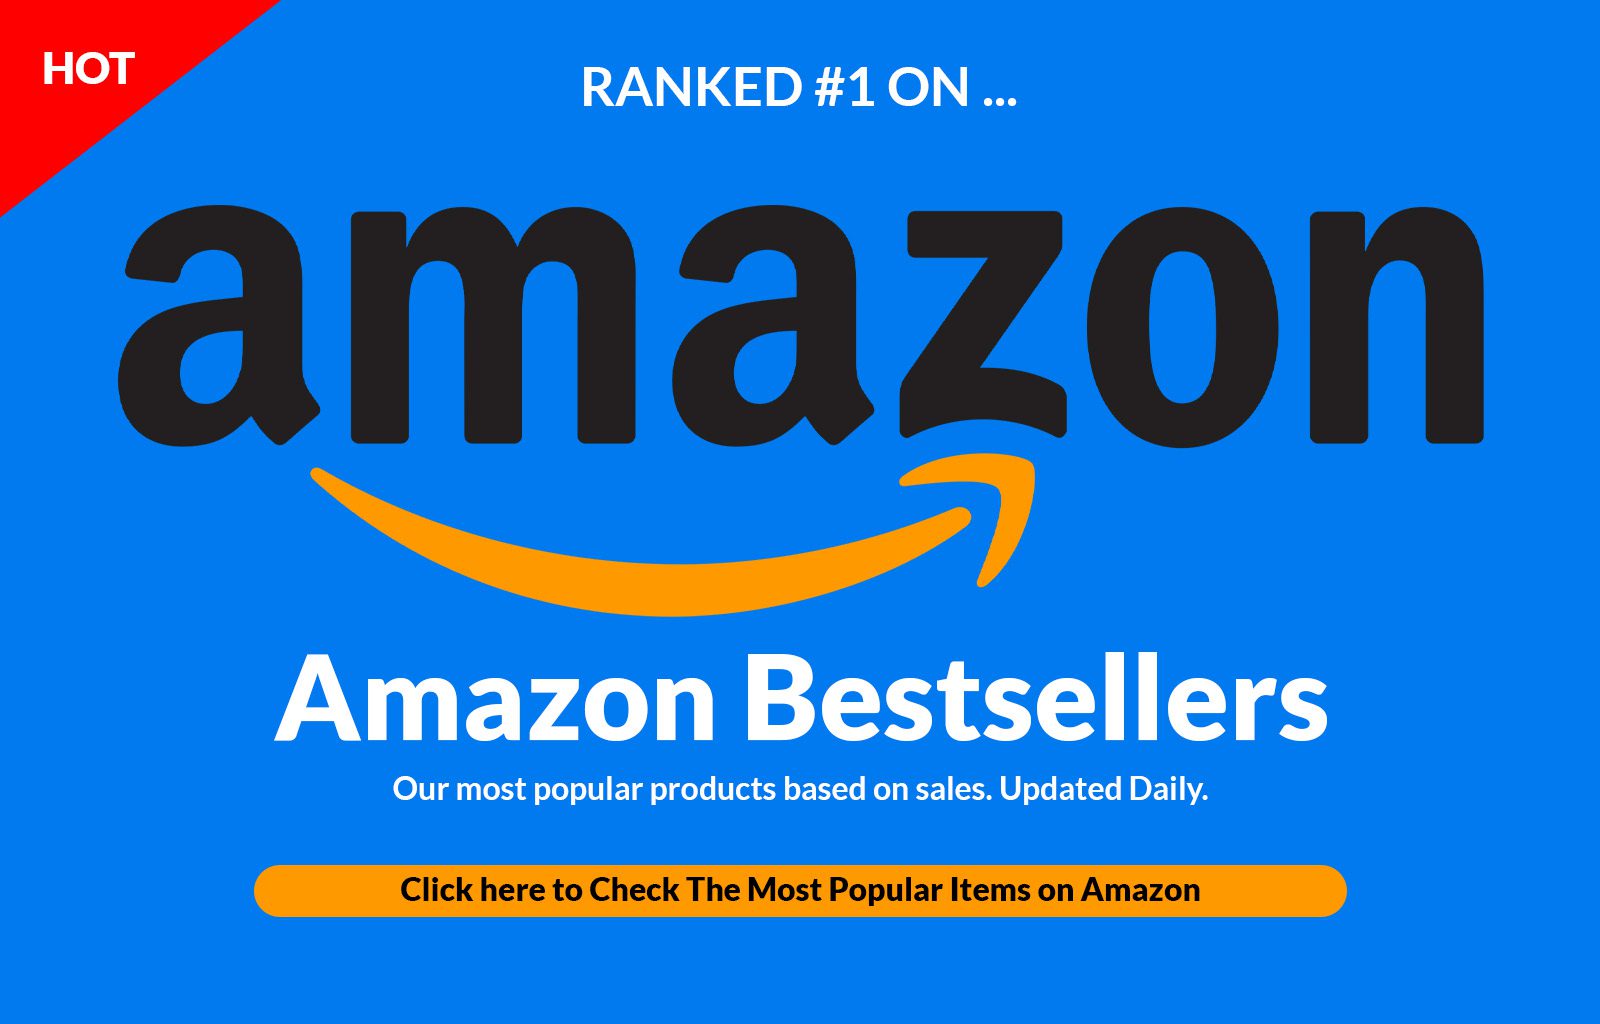 The most popular items on Amazon